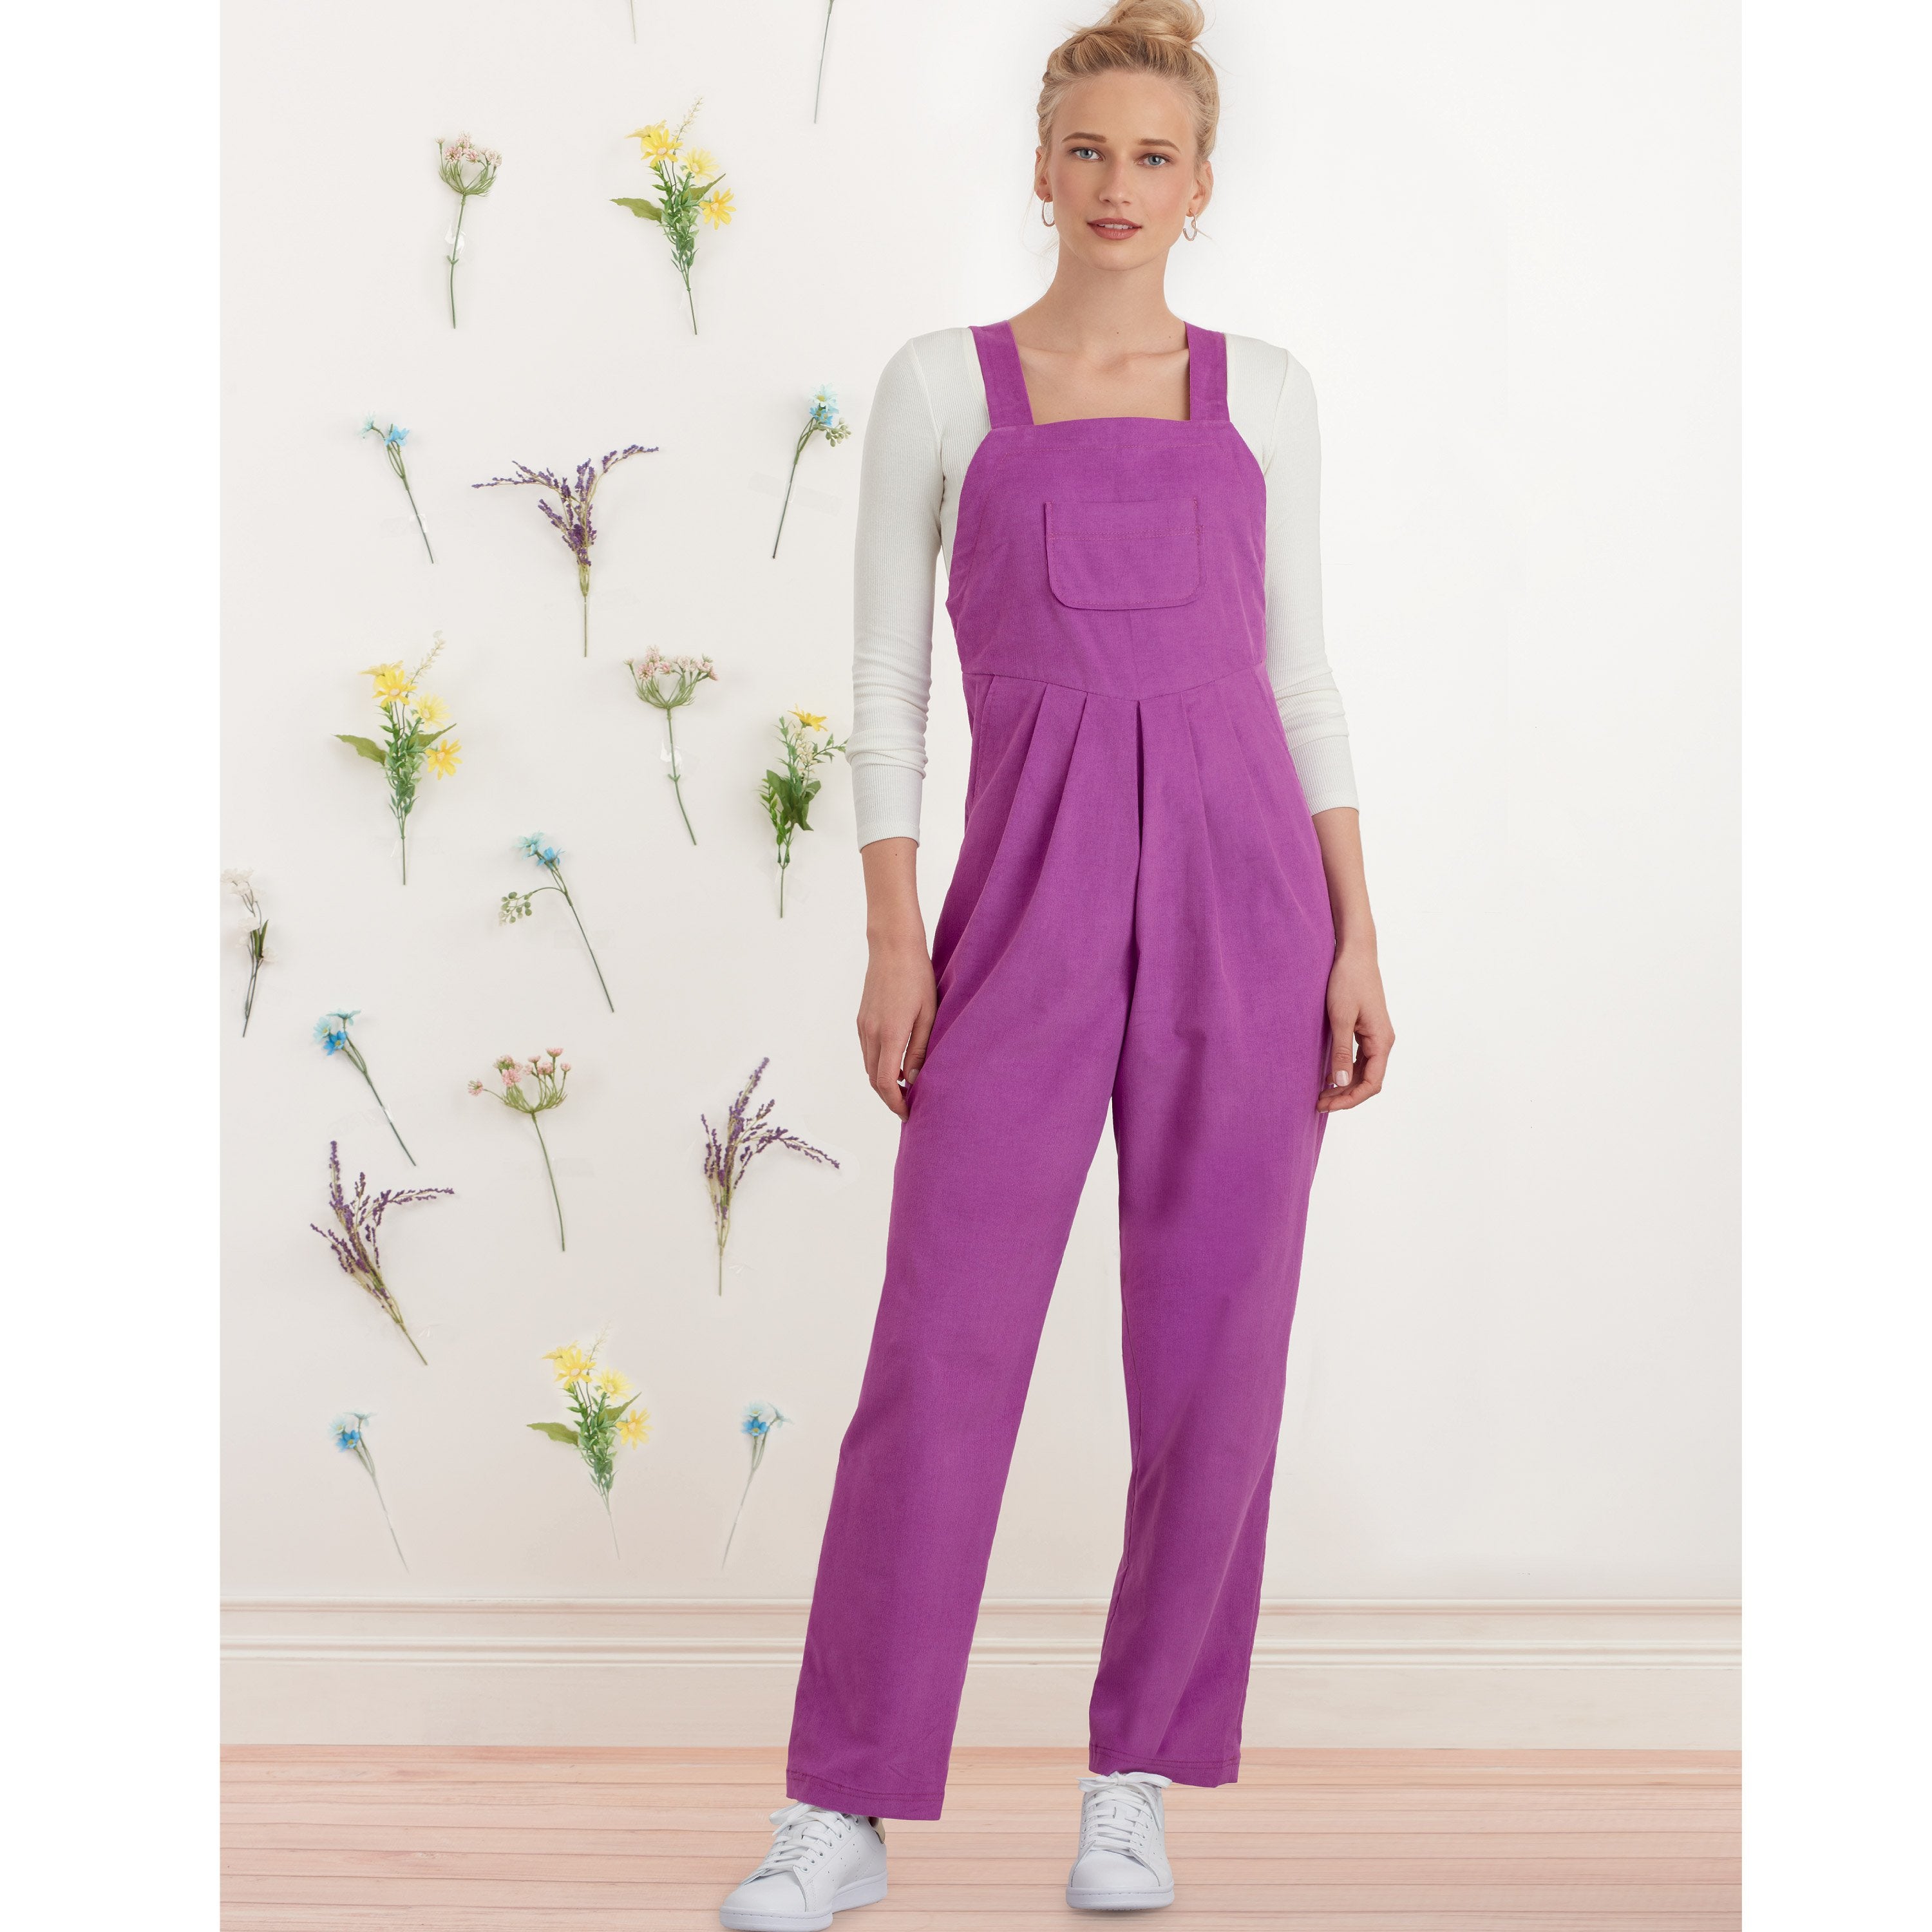 Simplicity Sewing Pattern 9382 Misses' Overall with Shaped Raised Waist and Back Ties from Jaycotts Sewing Supplies